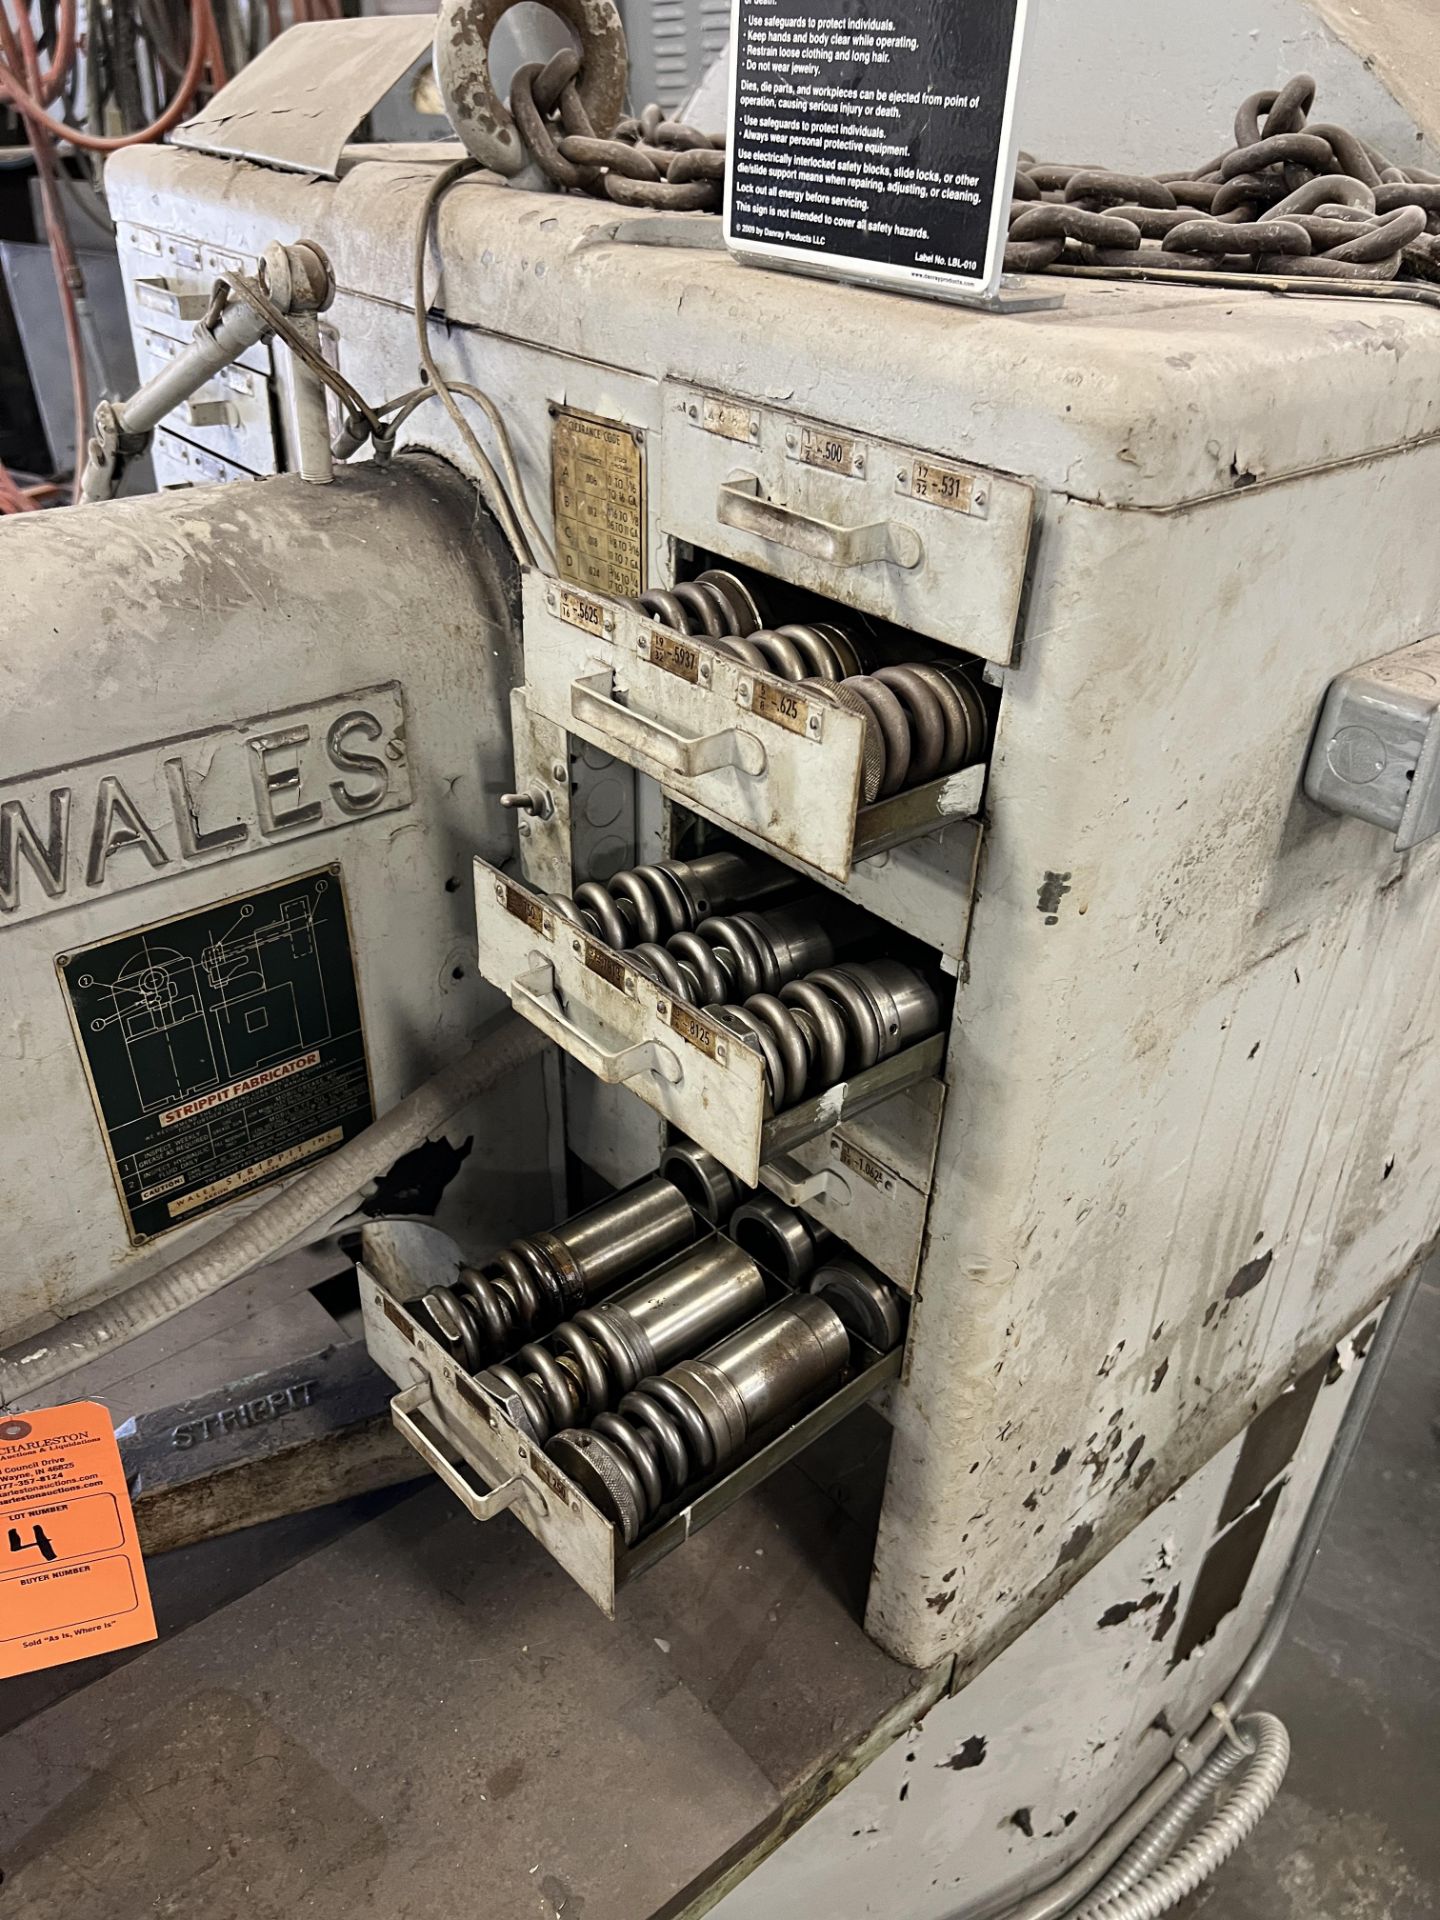 WALES SHEET METAL FABRICATOR SERIAL # 79532657 WITH COLLETS AND TOOLING - Image 3 of 6